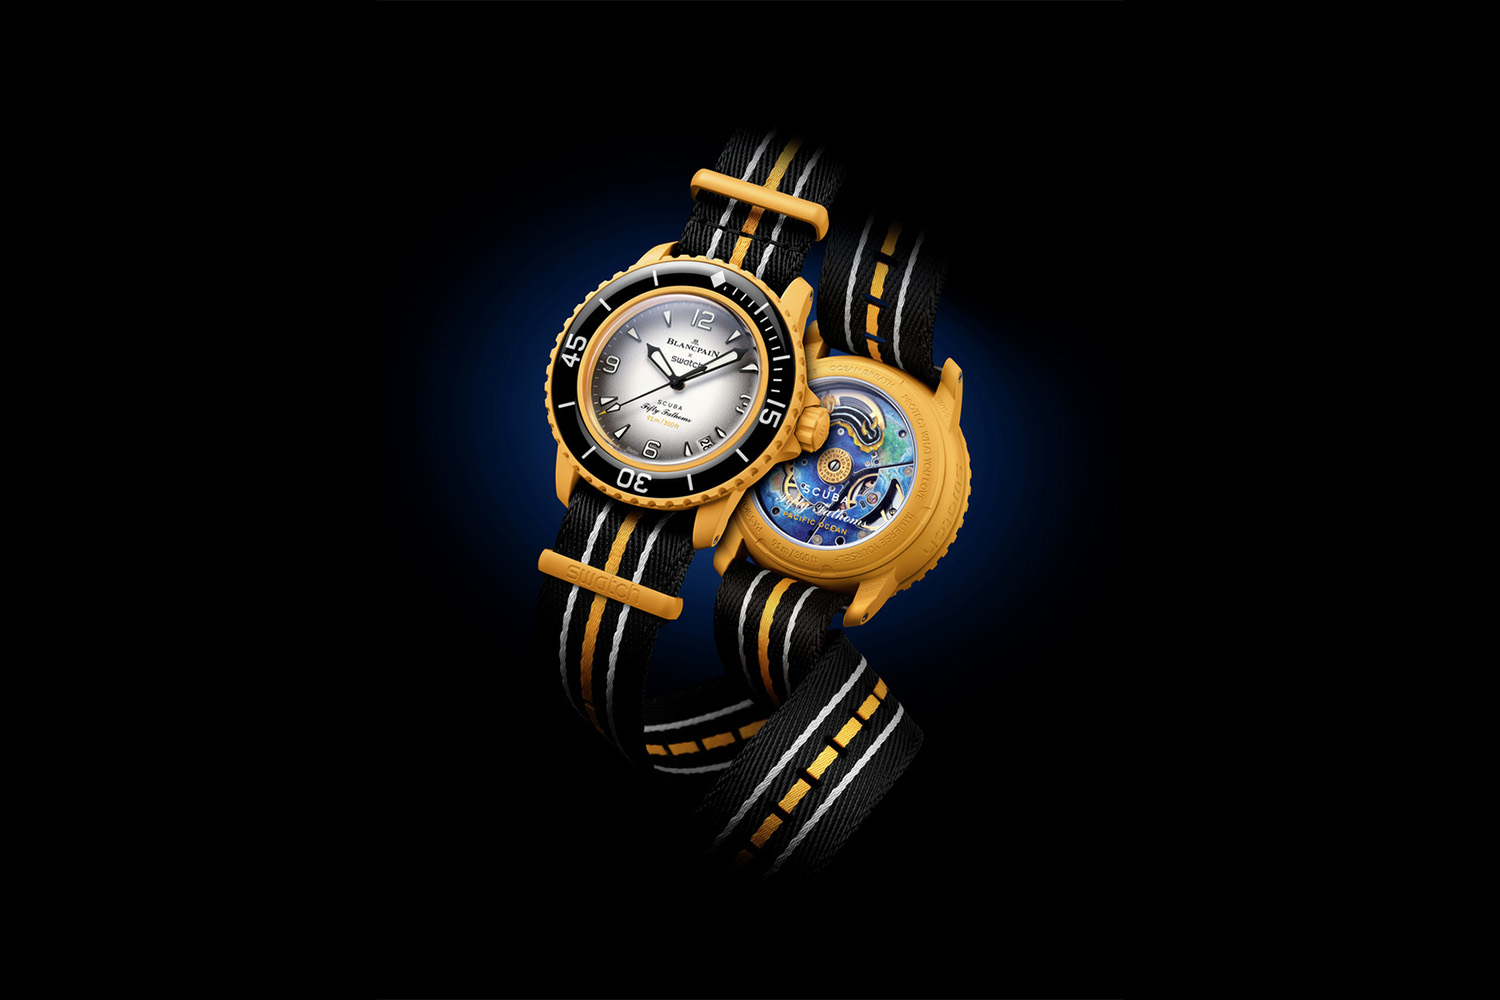 Gold and Black watch with a white face and an ocean design inside